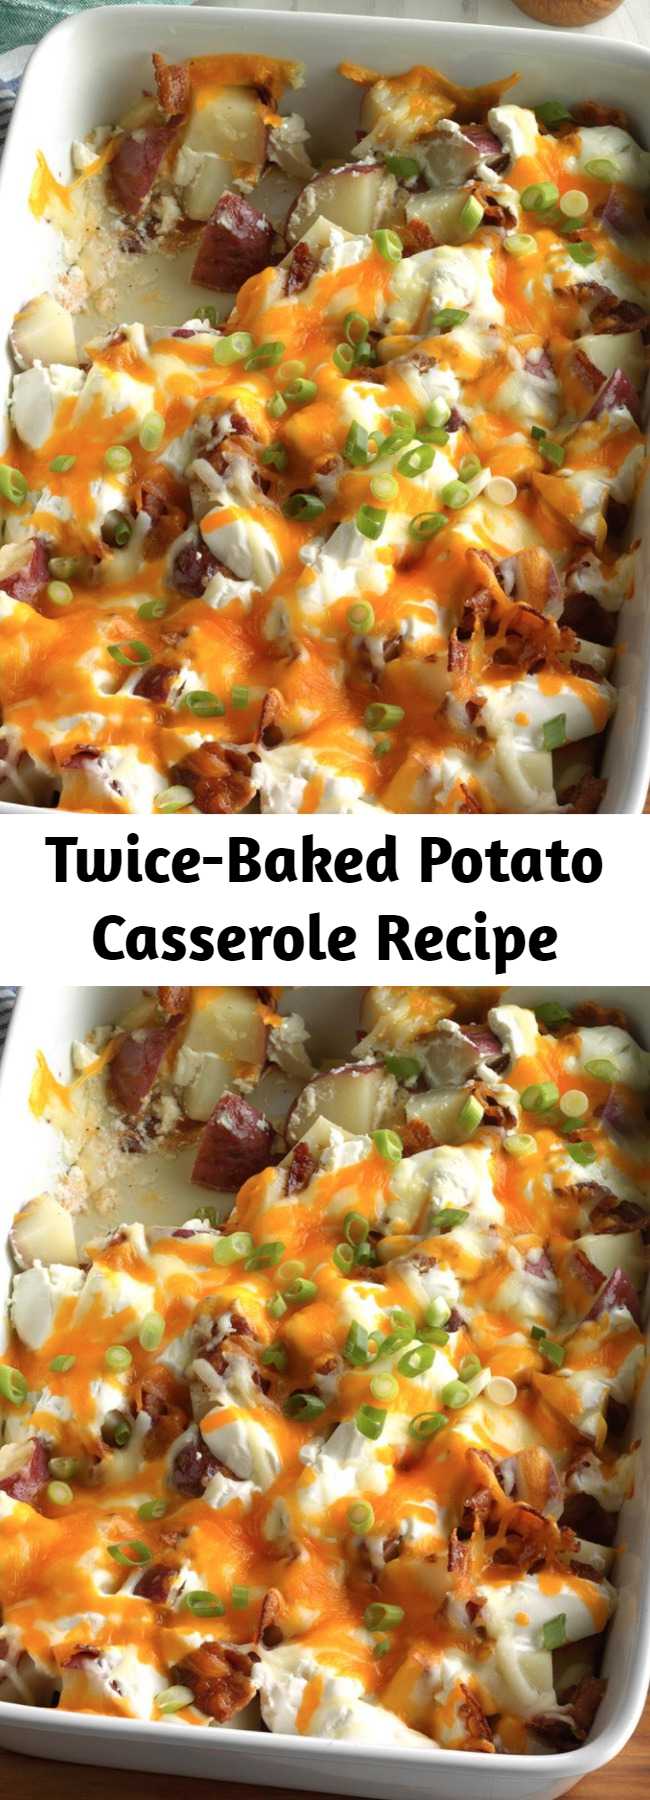 Twice-Baked Potato Casserole Recipe - My daughter gave me this twice-baked potatoes recipe because she knows I love potatoes. The hearty casserole is loaded with a palate-pleasing combination of bacon, cheeses, green onions and sour cream.